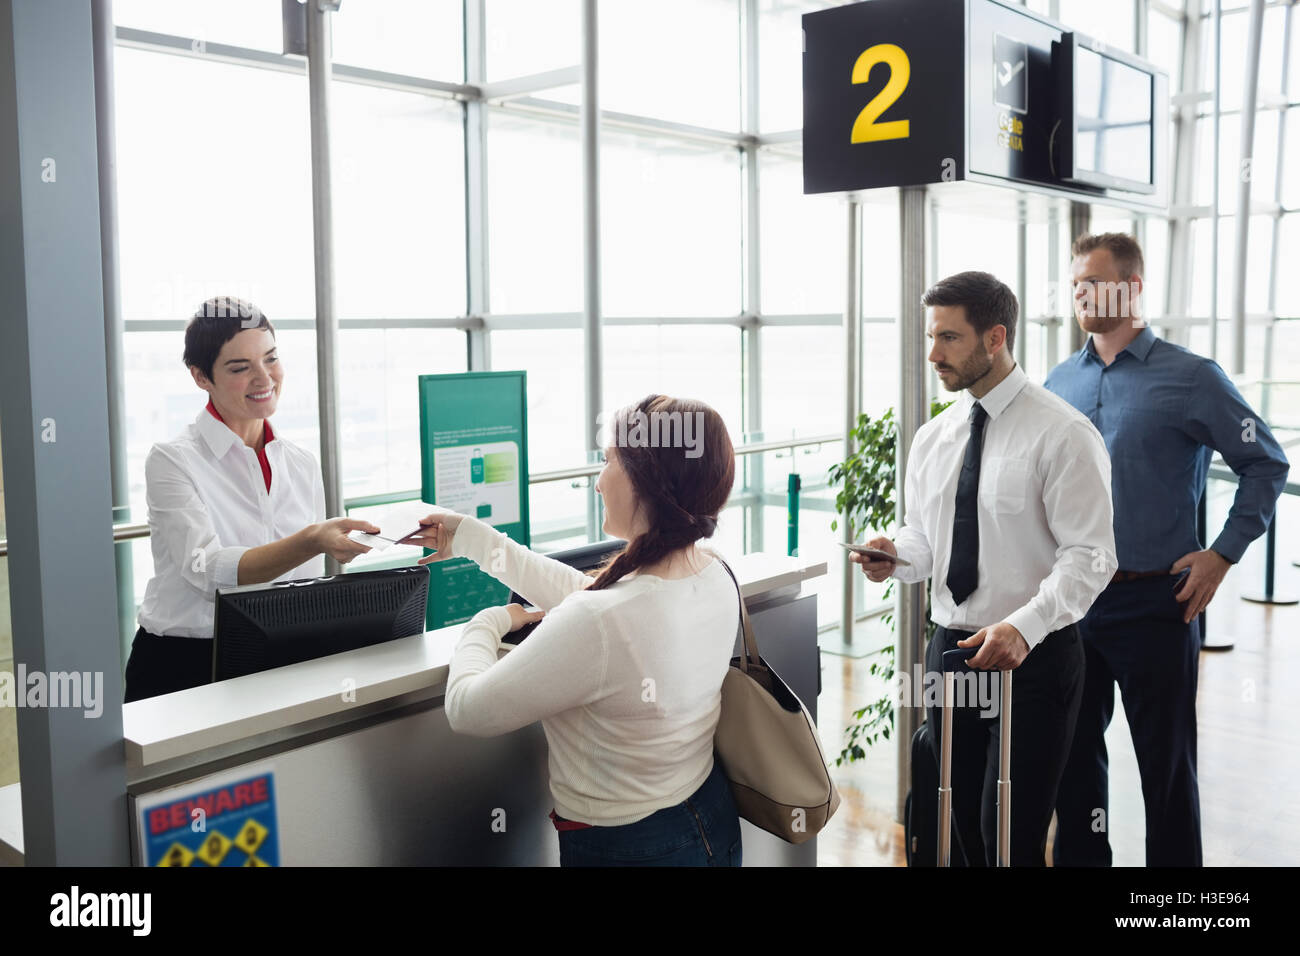 Woman giving her passport to airline check-in attendant Stock Photo